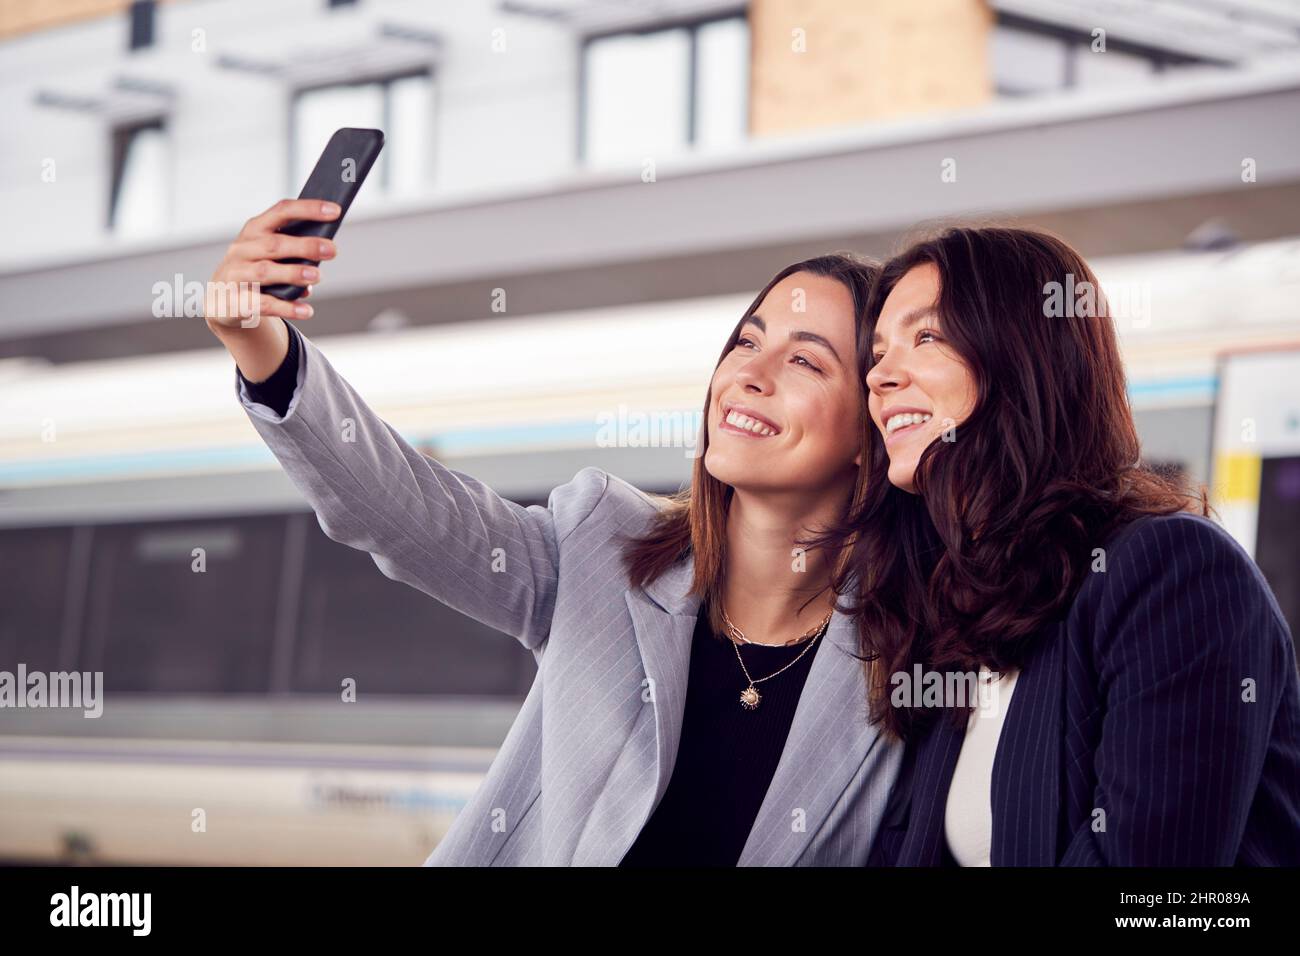 Businesswomen Commuting To Work Waiting For Train On Station Platform Taking Selfie On Mobile Phone Stock Photo